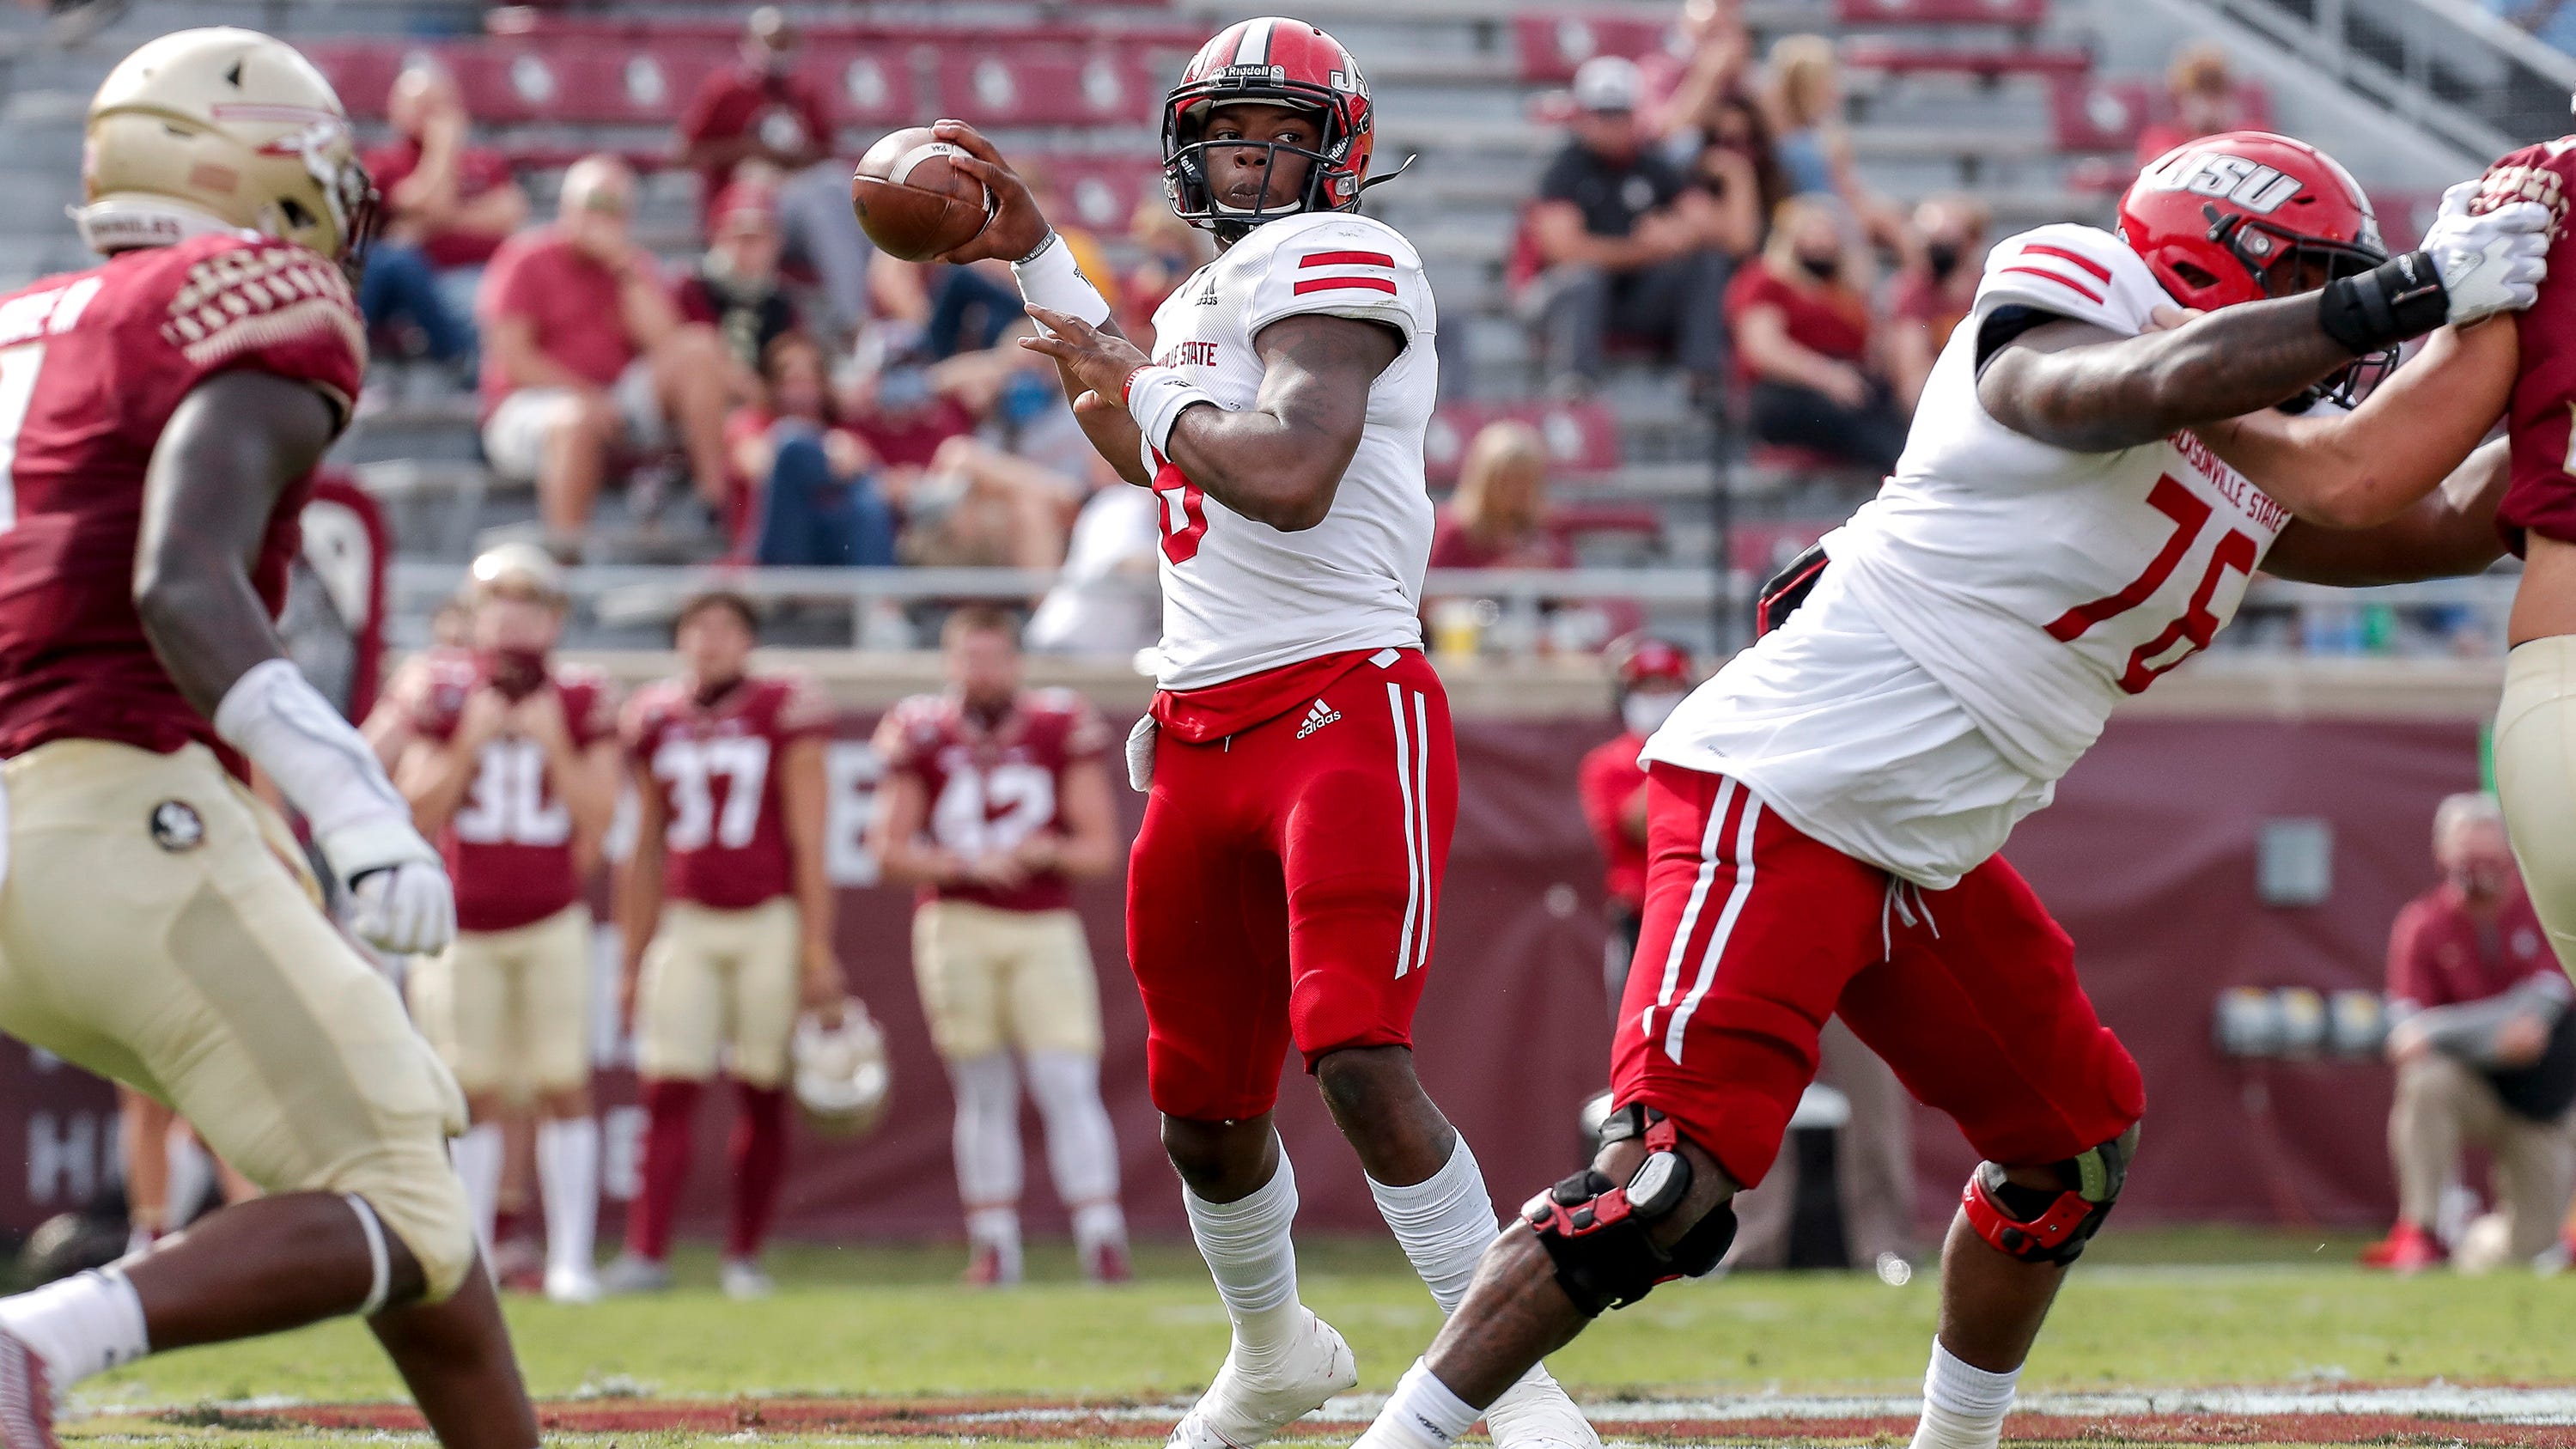 Jacksonville State football's OVC spring schedule include Sunday games